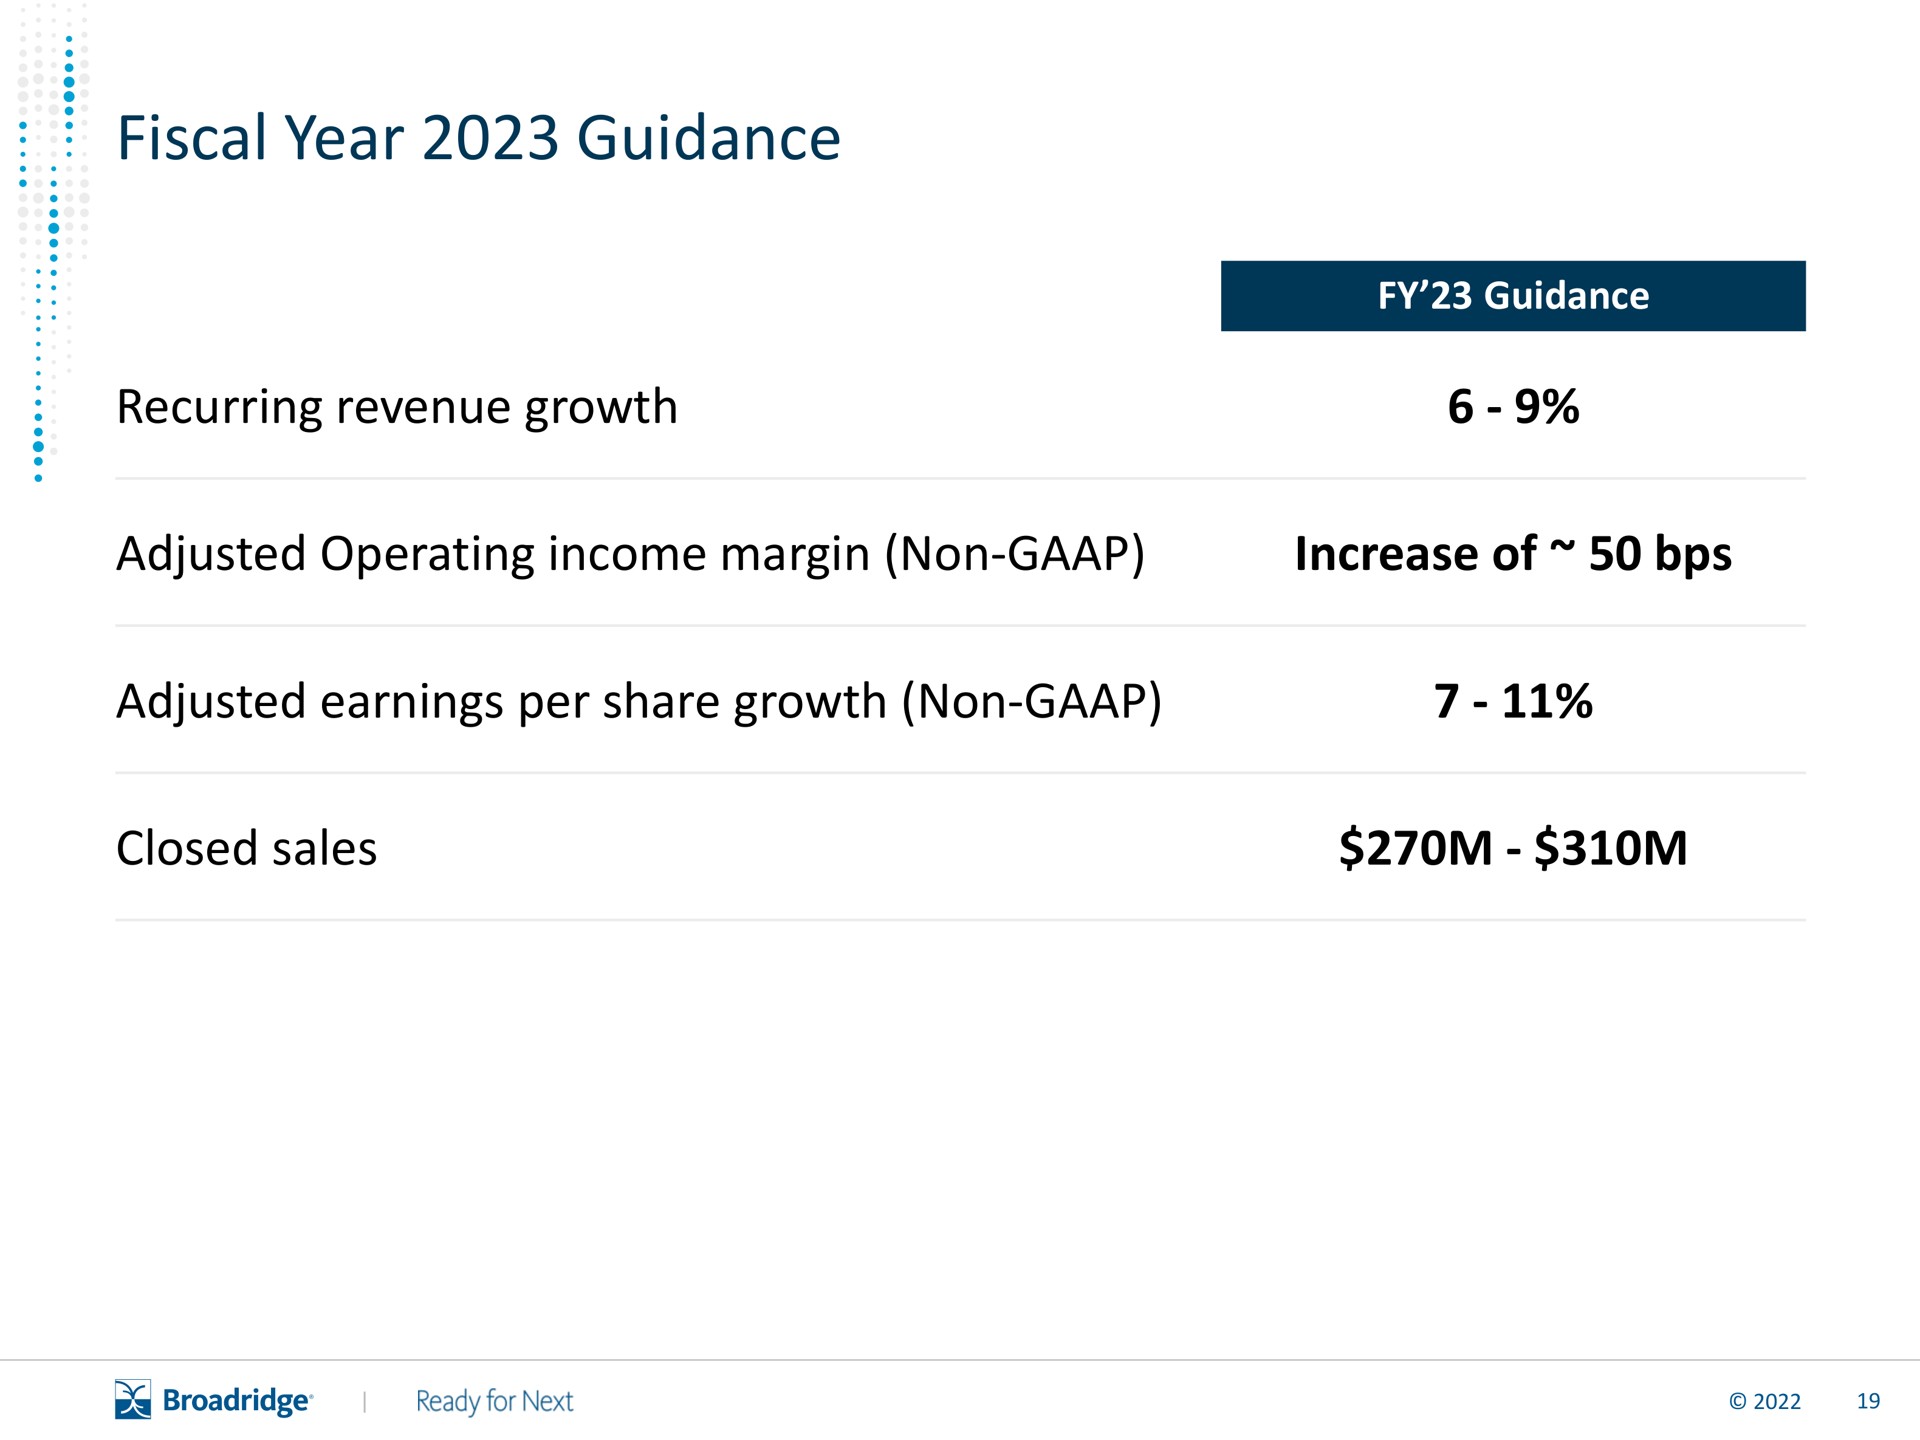 fiscal year guidance recurring revenue growth adjusted operating income margin non increase of adjusted earnings per share growth non closed sales | Broadridge Financial Solutions